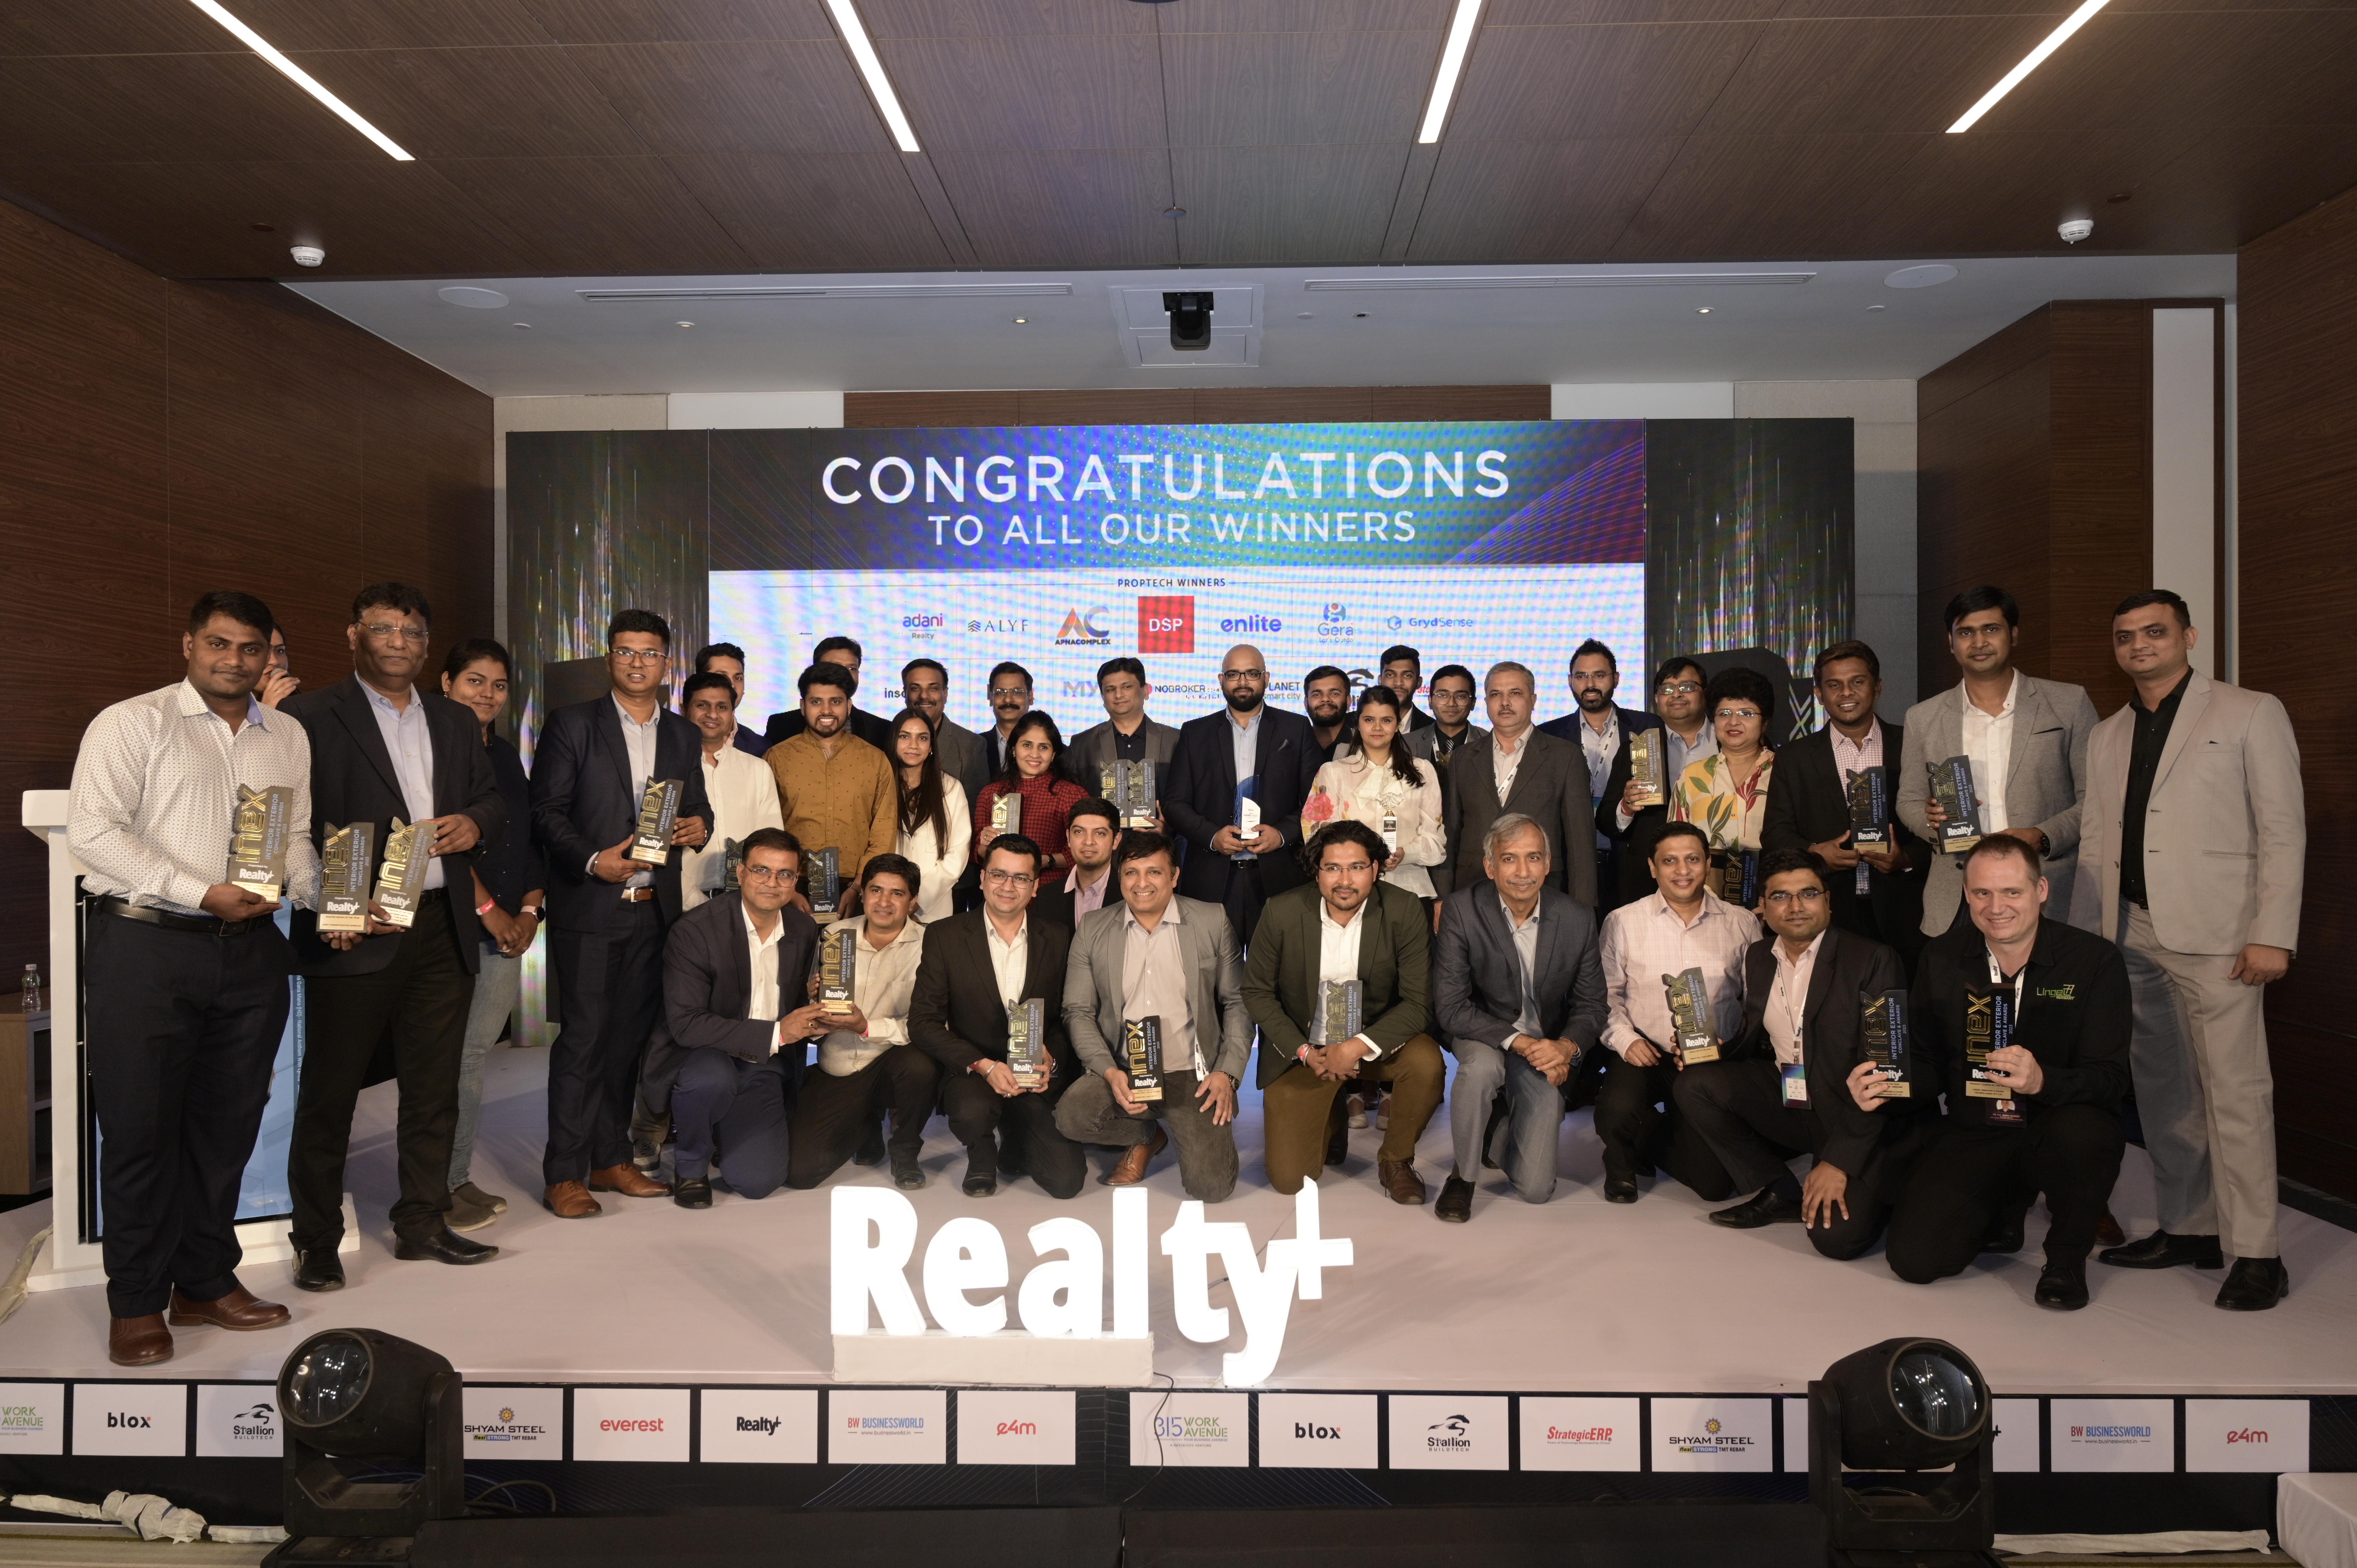 Realty+ Grand Finale of the Event Showcasing Finest of Technology, Design & Spaces